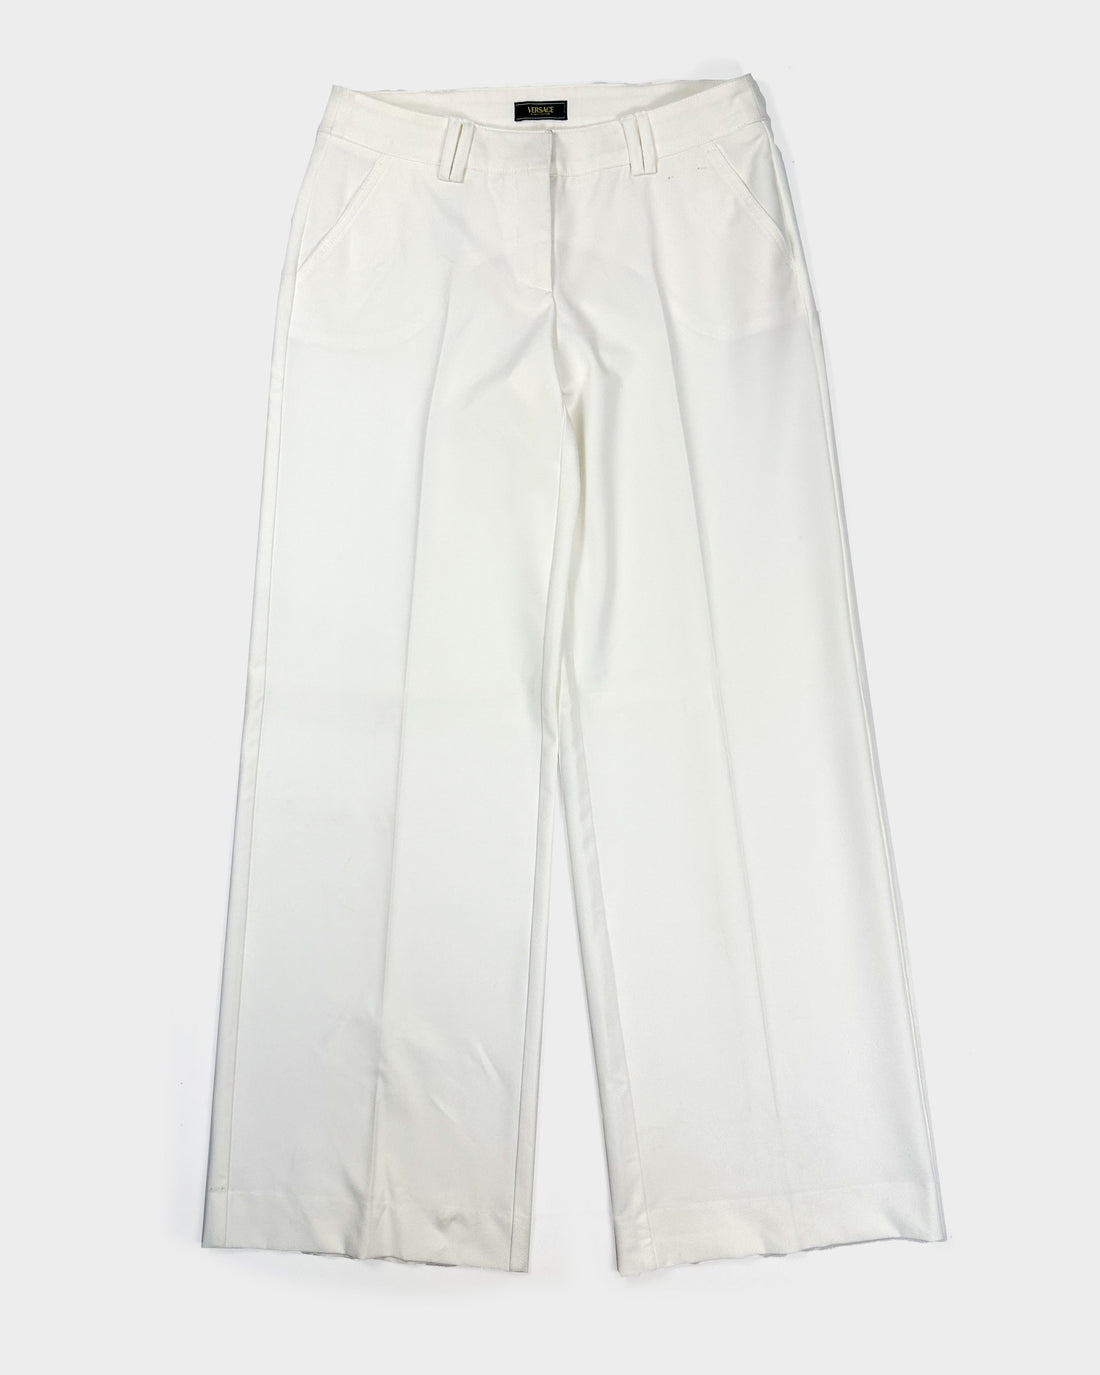 Versace White Wide Pants 2000's